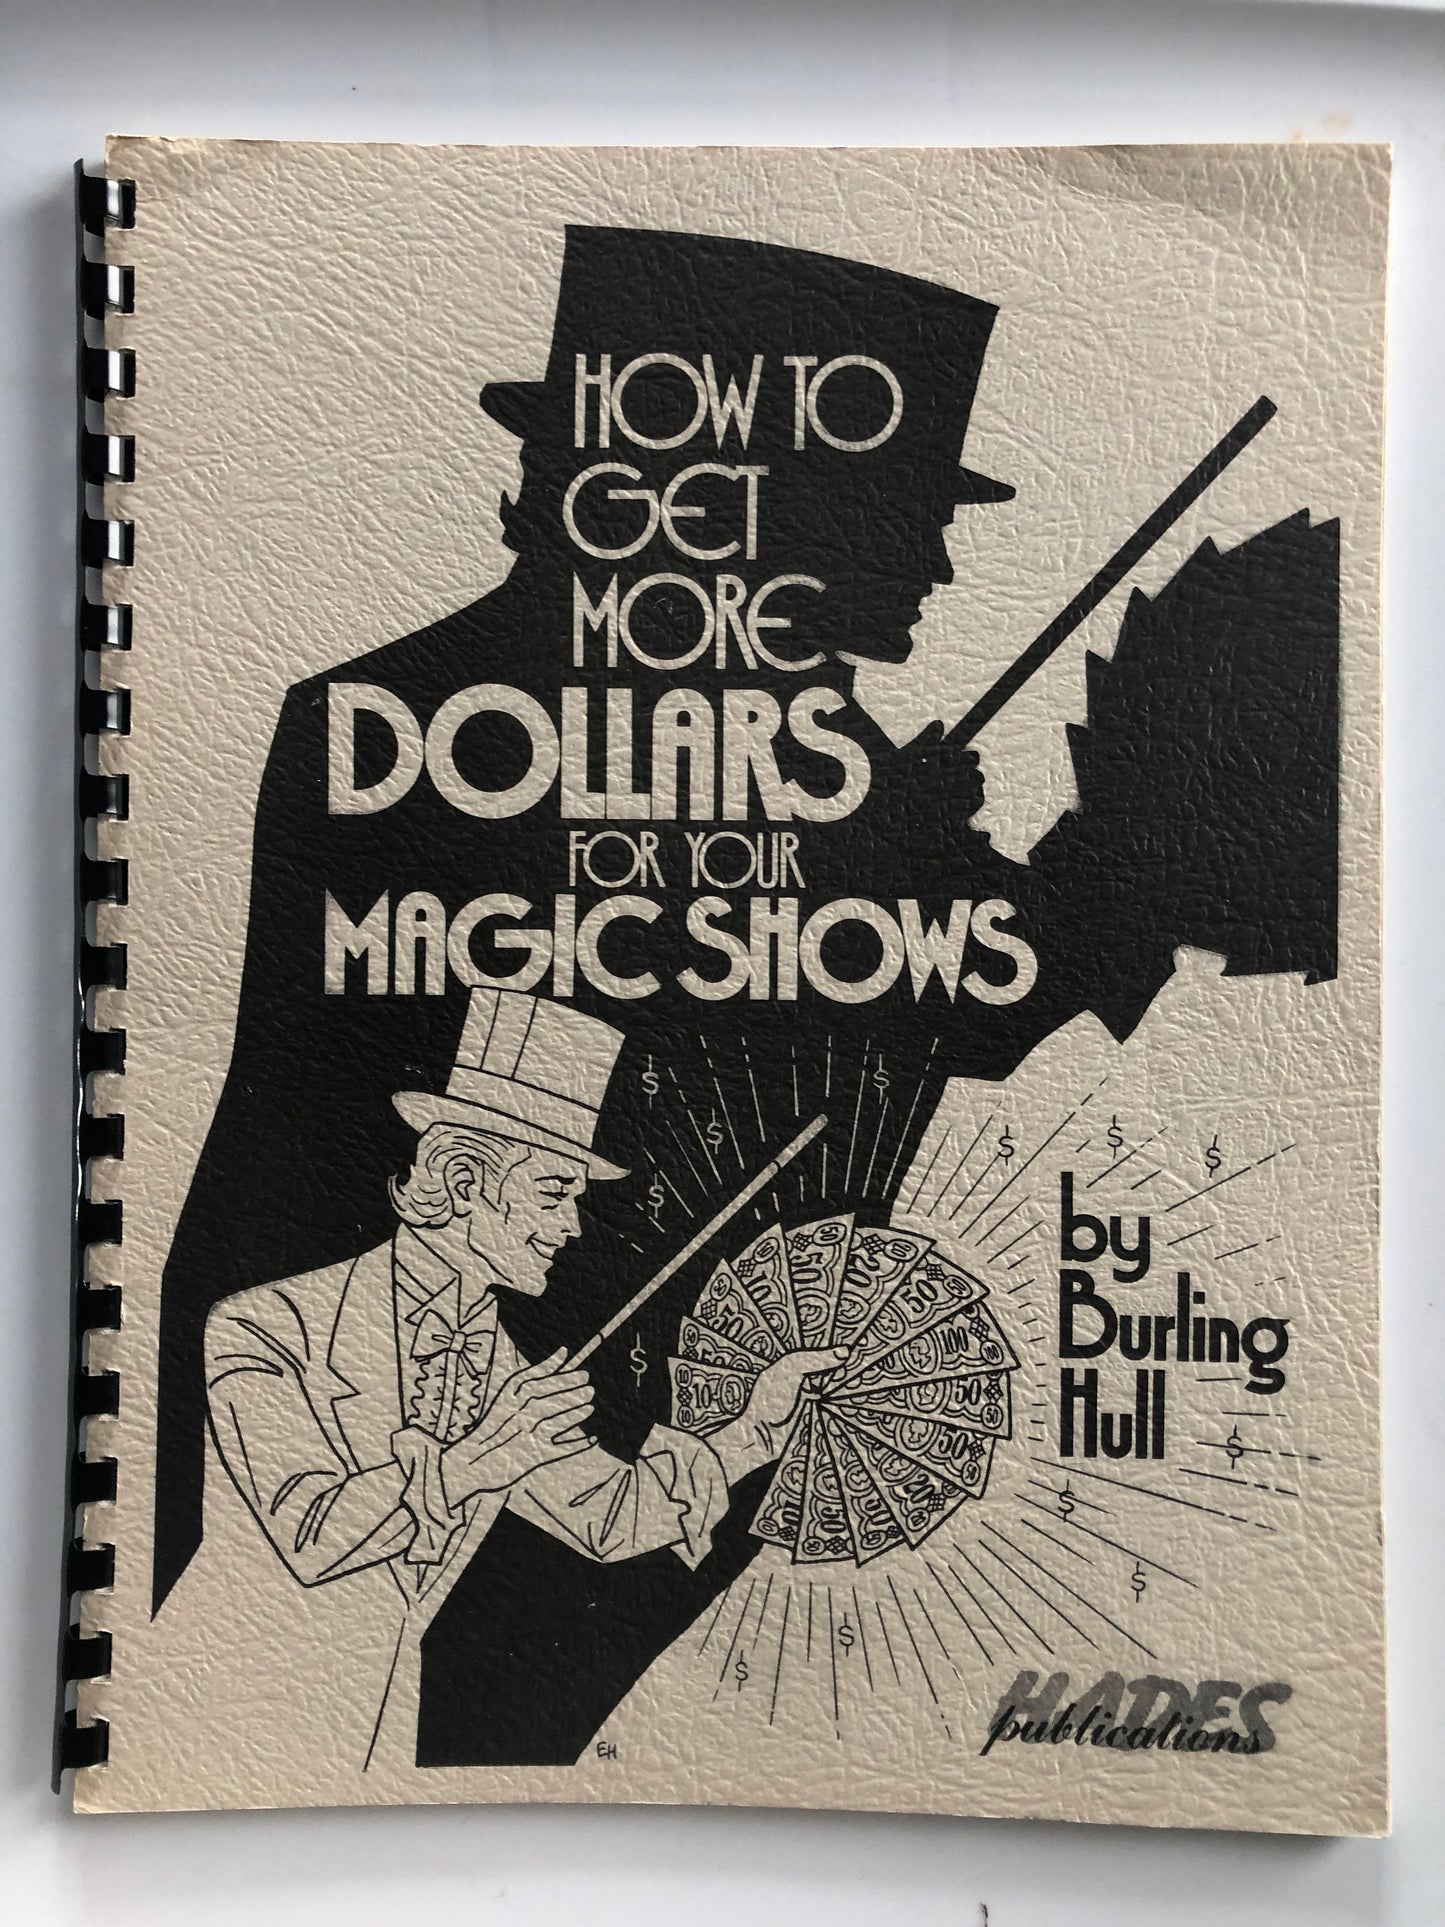 How To Get More Dollars For Your Magic Shows - Burling Hull